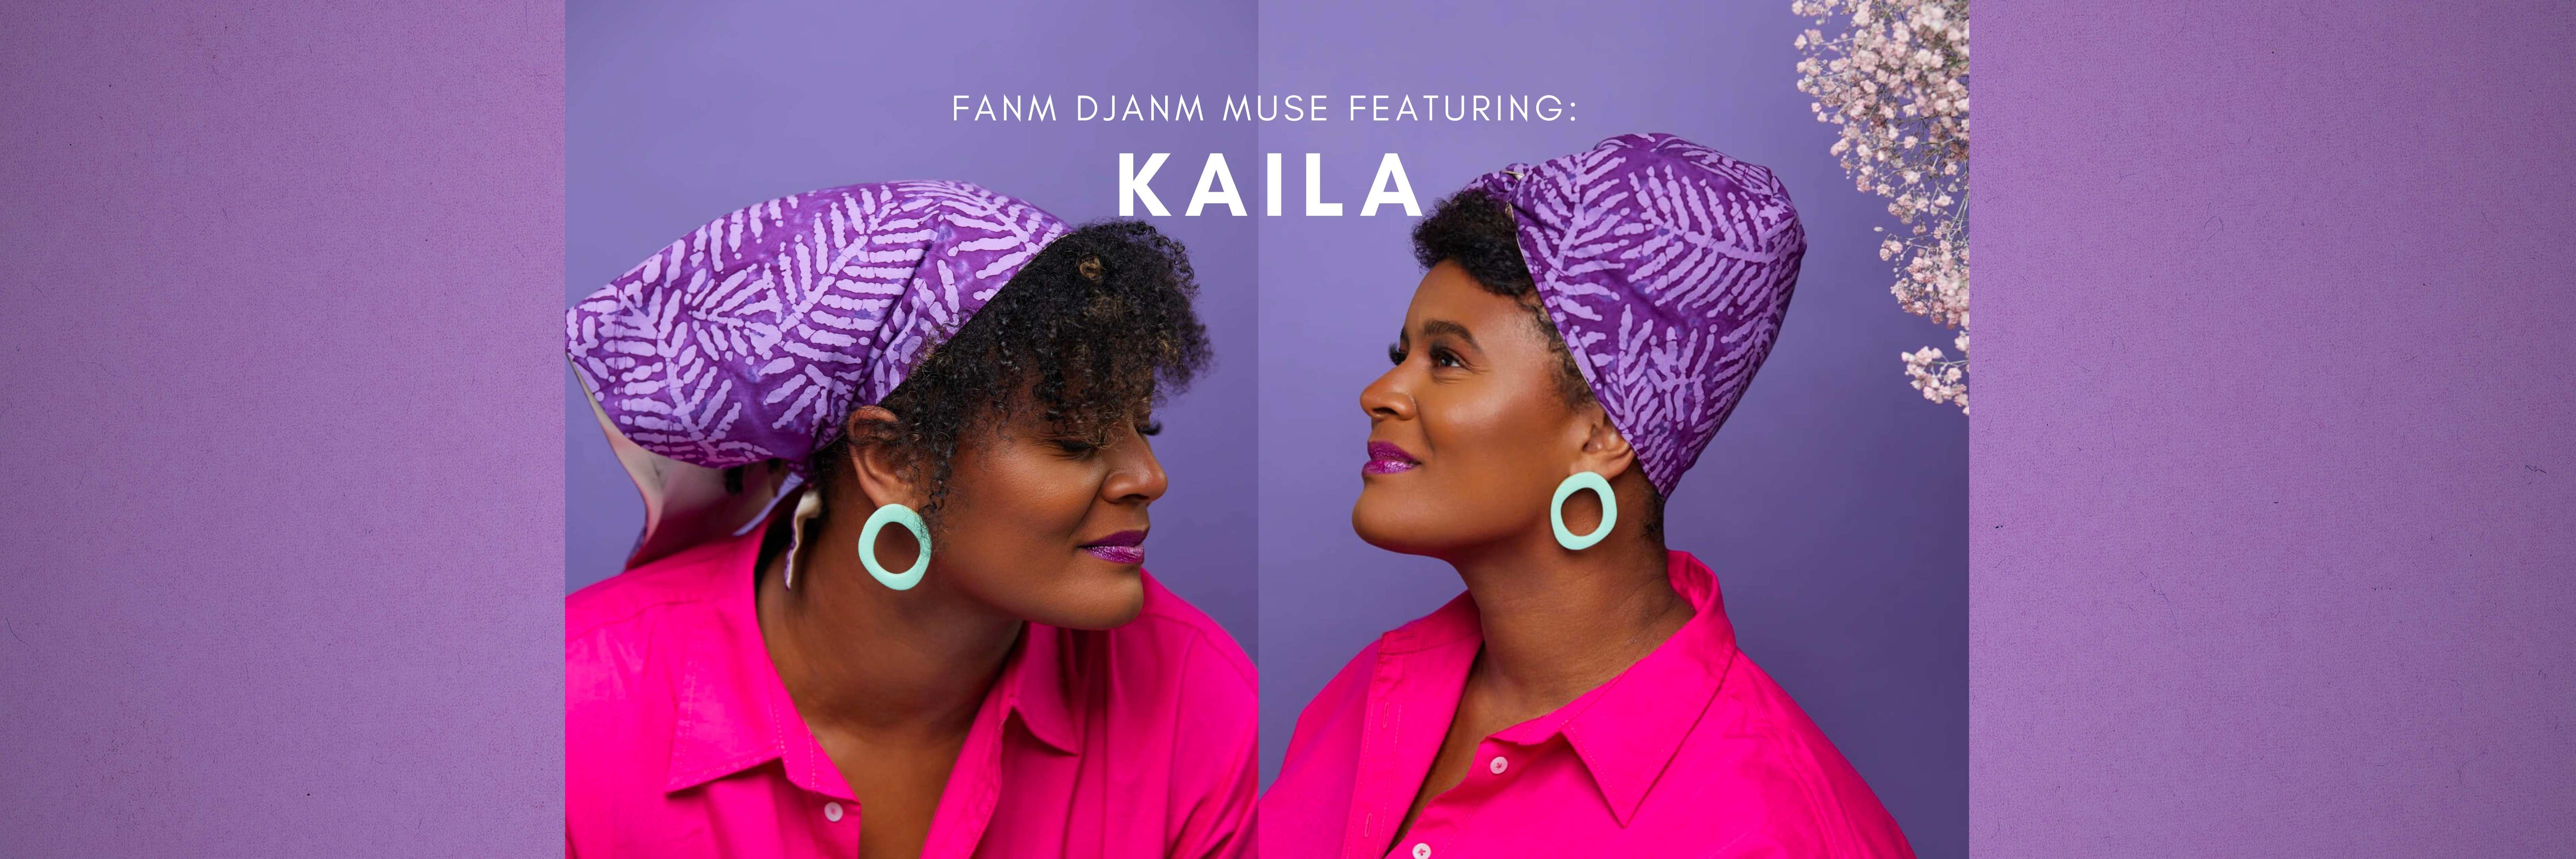 Fanm Djanm Muse Featuring: Kaila